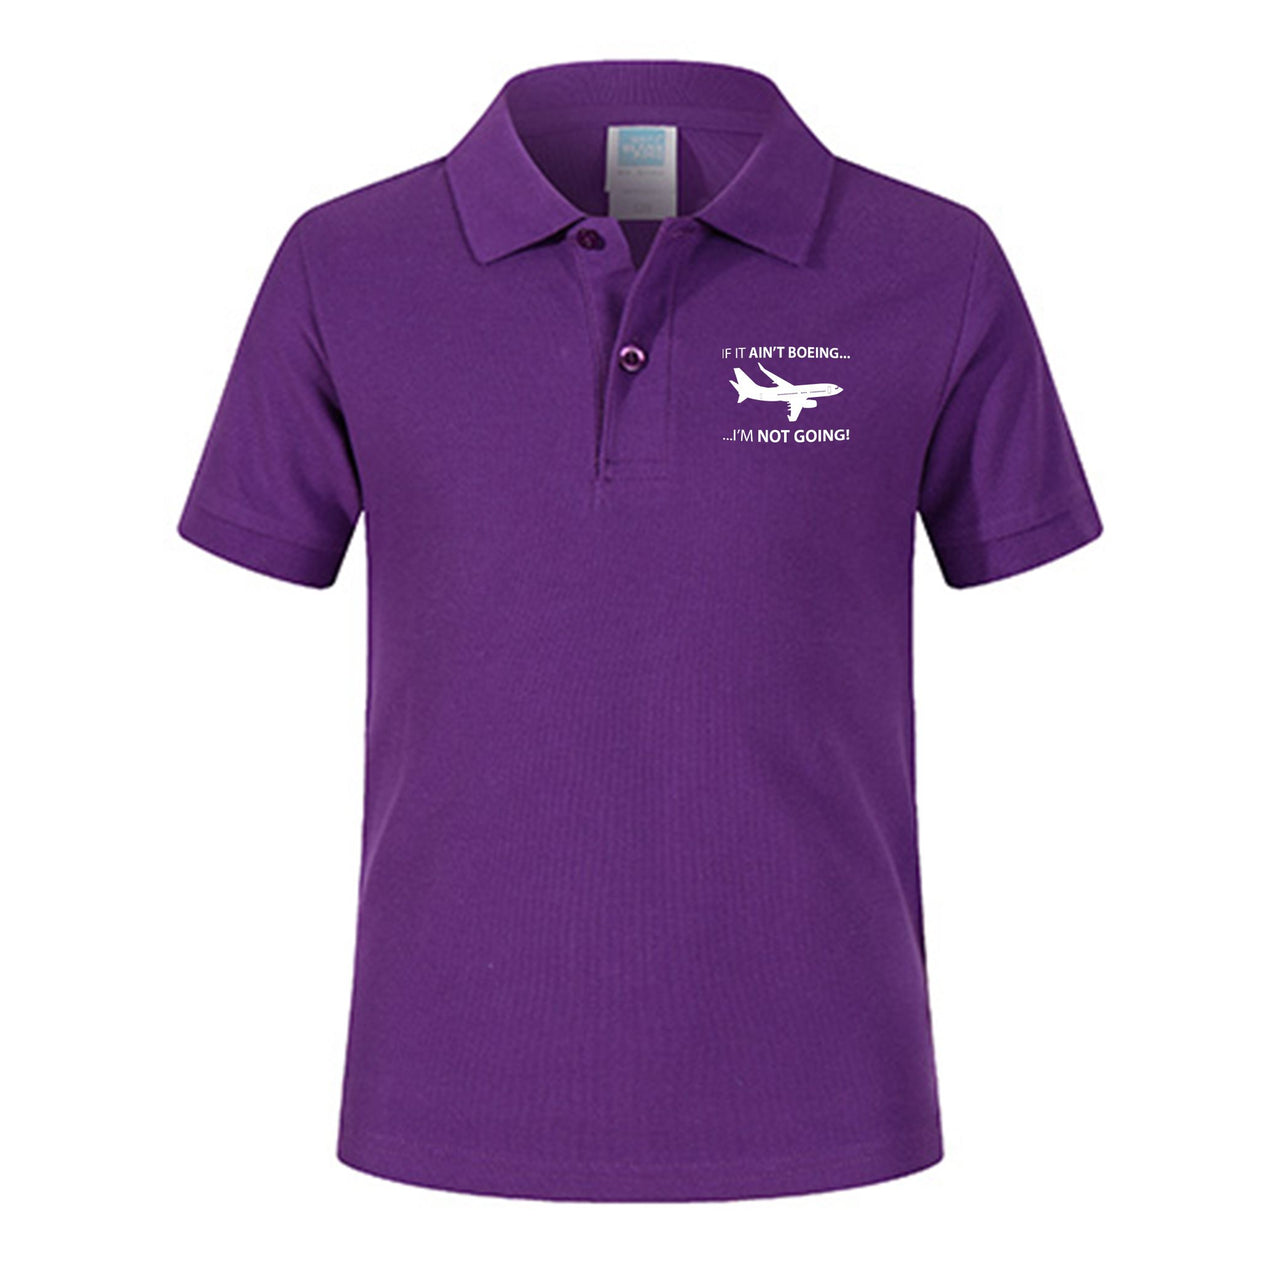 If It Ain't Boeing I'm Not Going! Designed Children Polo T-Shirts